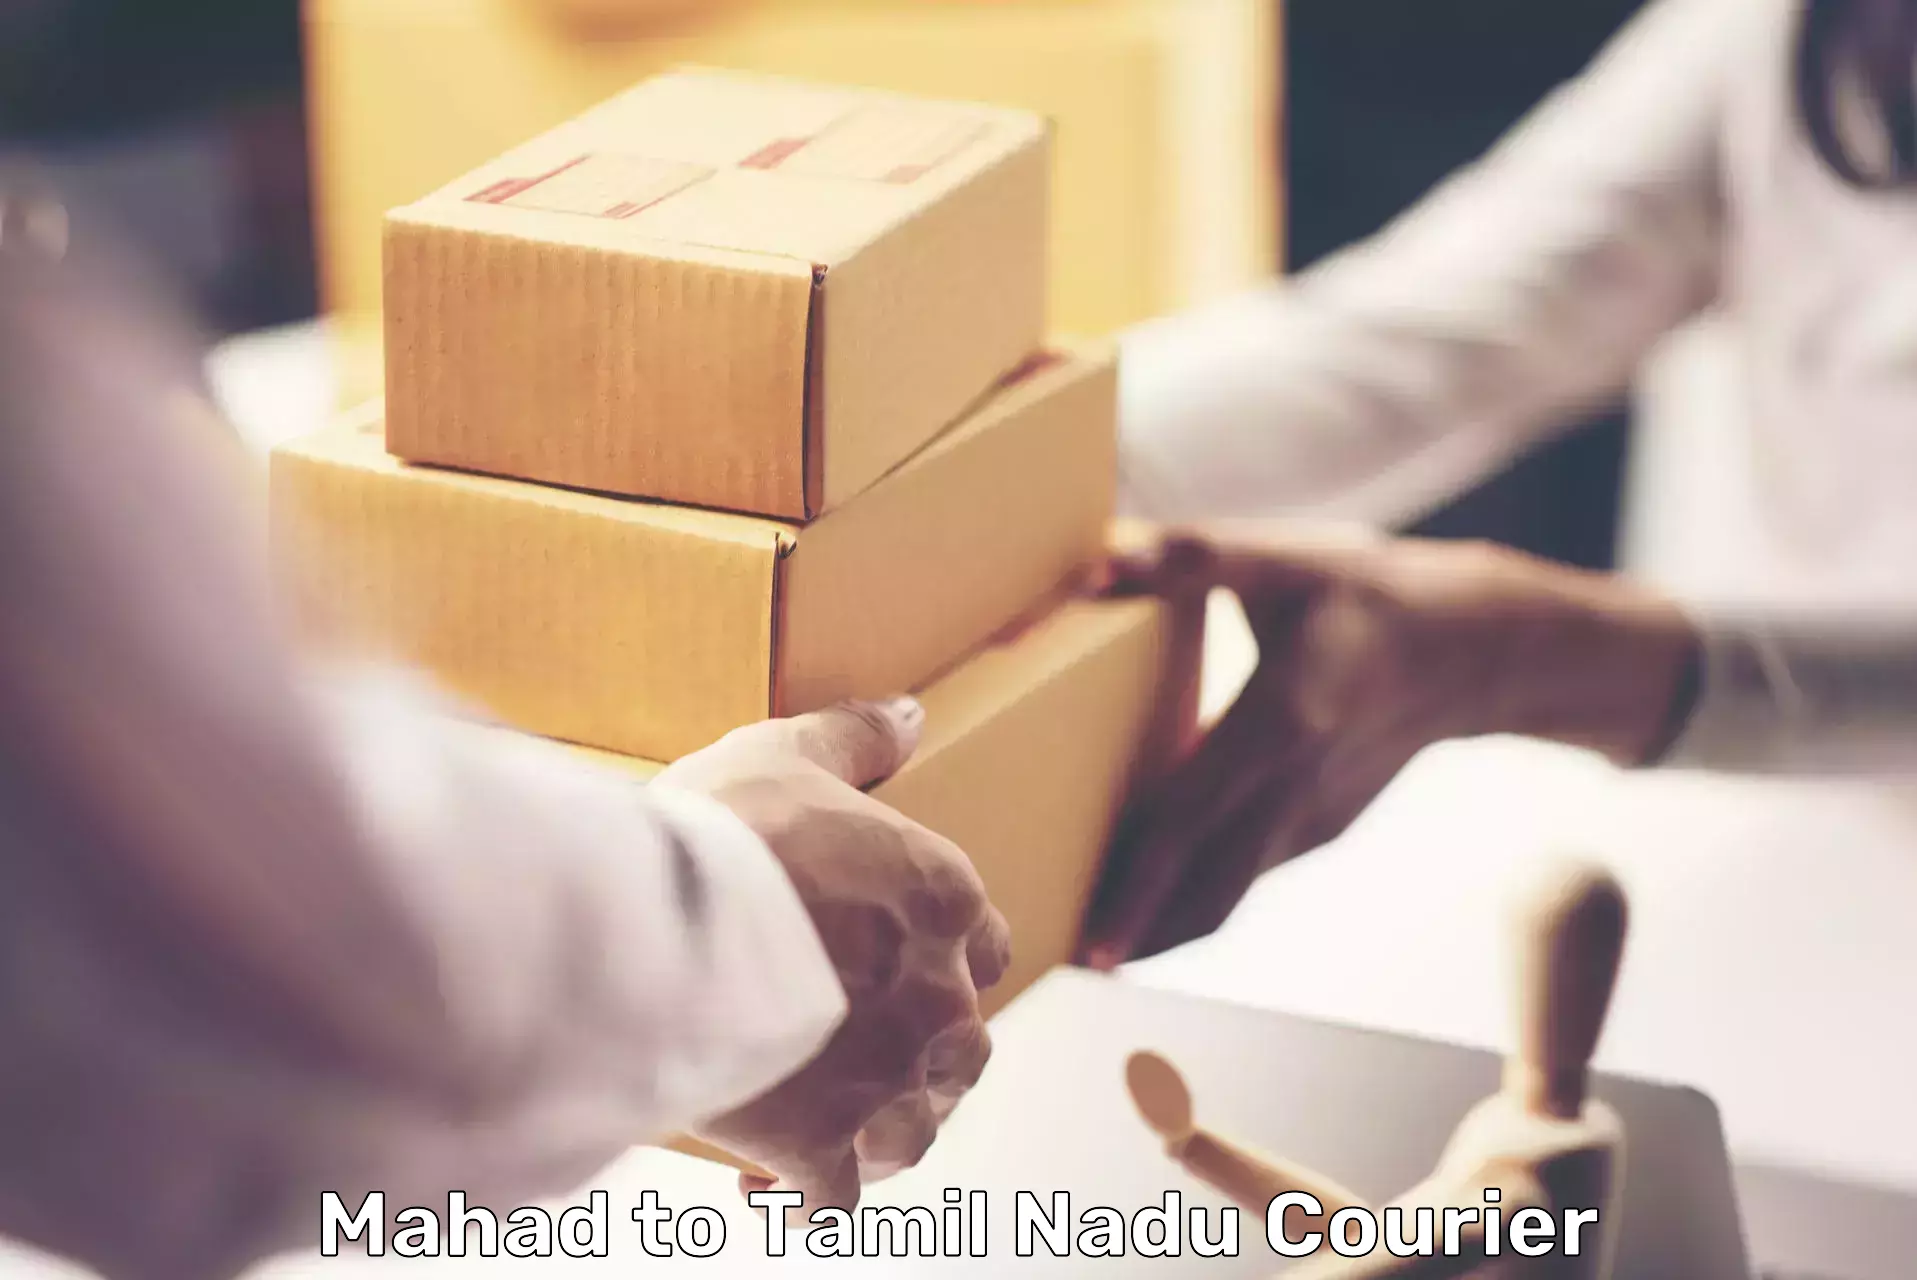 Corporate courier solutions Mahad to Vellore Institute of Technology